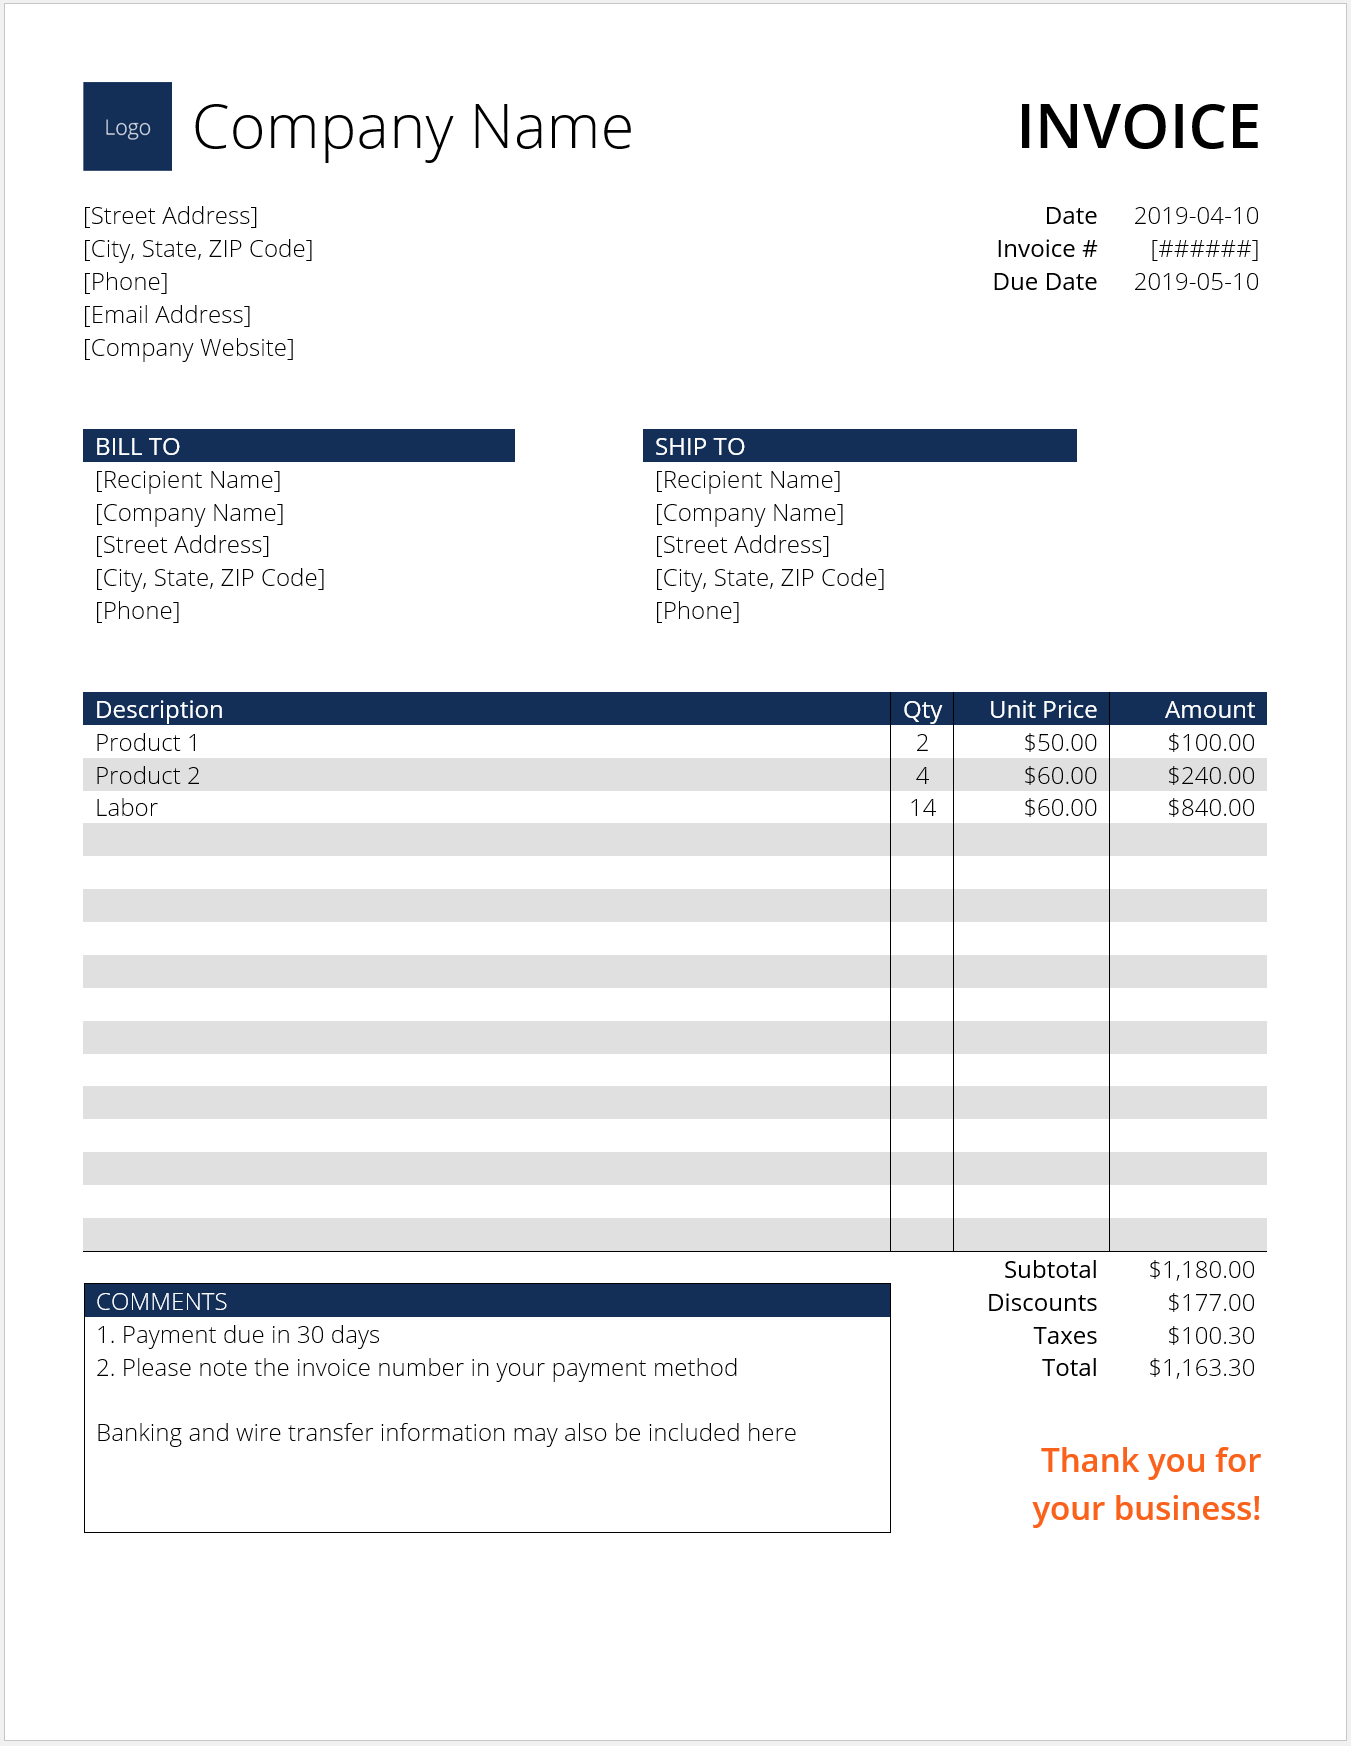 Invoice Template (Word) – Download Free Template At Cfi For I Need An Invoice Template